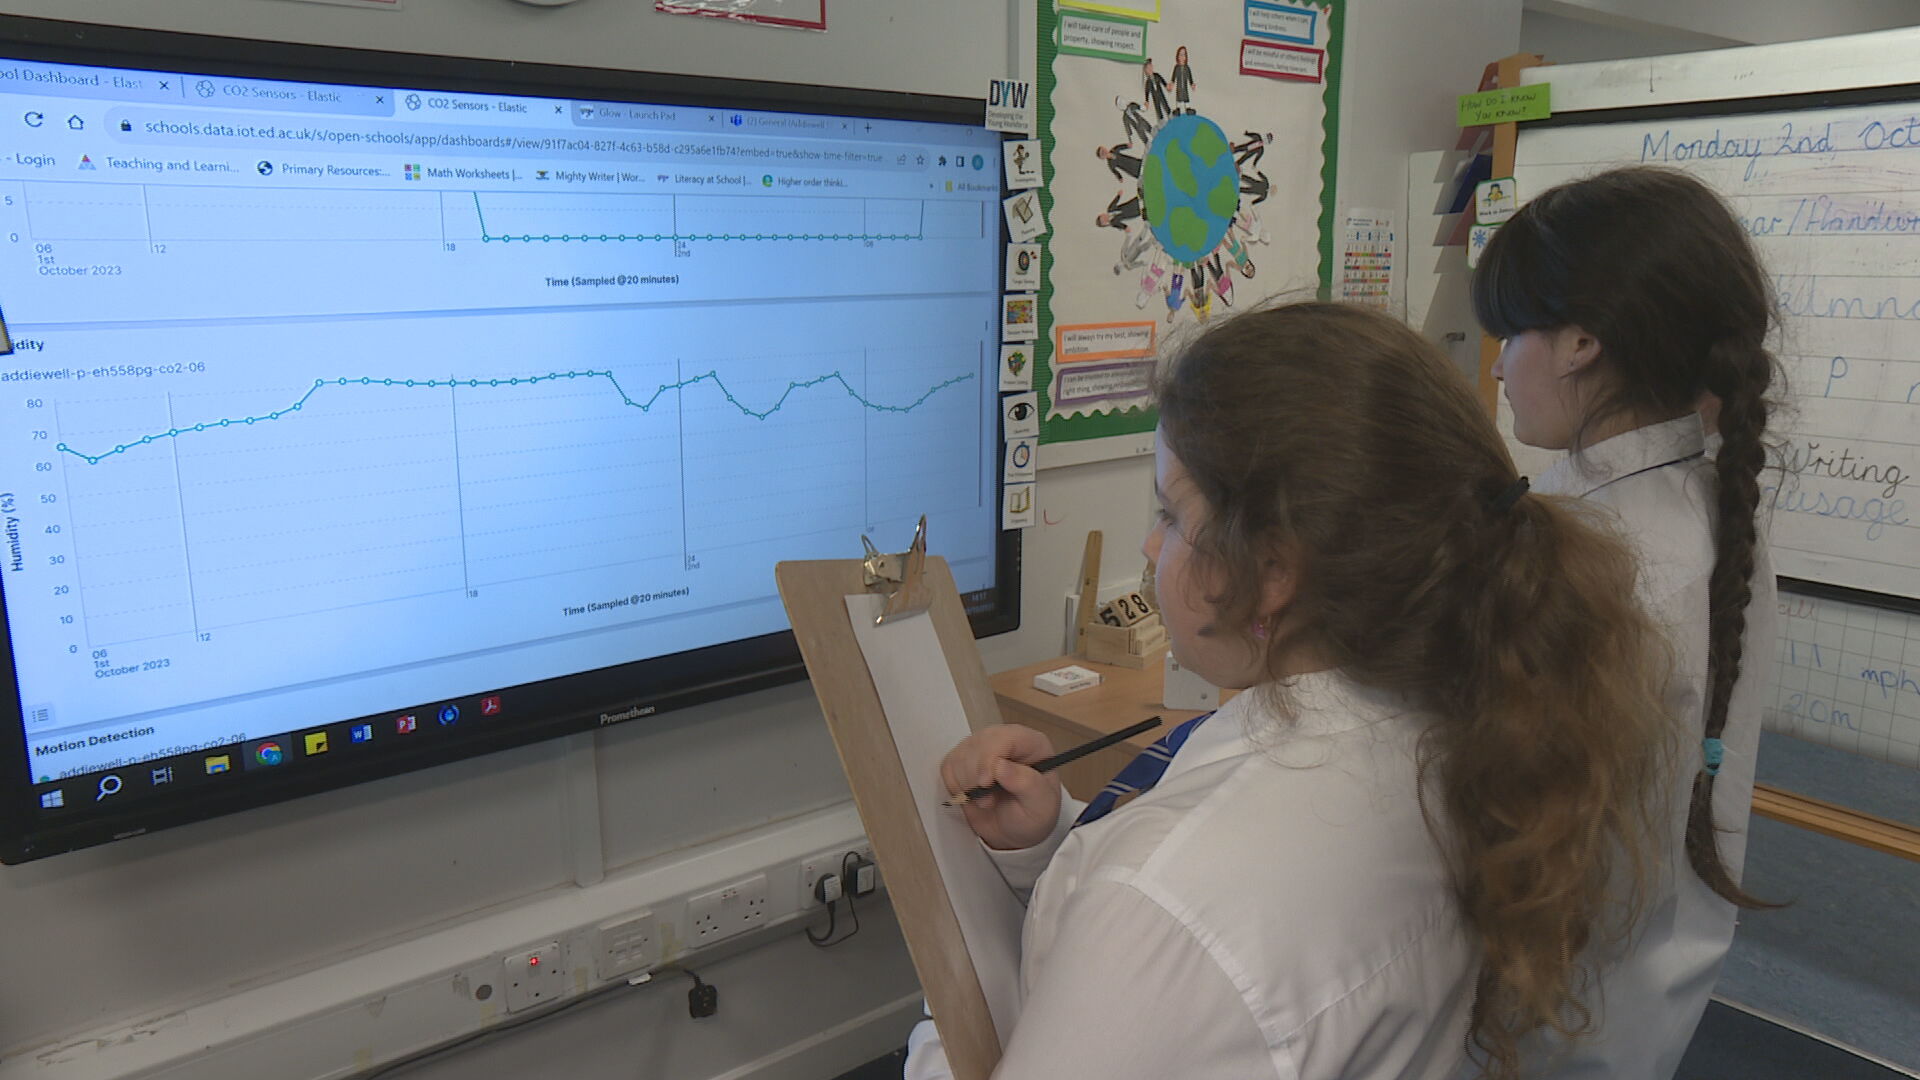 P7 pupils analysing the data collected from the sensor in their classroom.